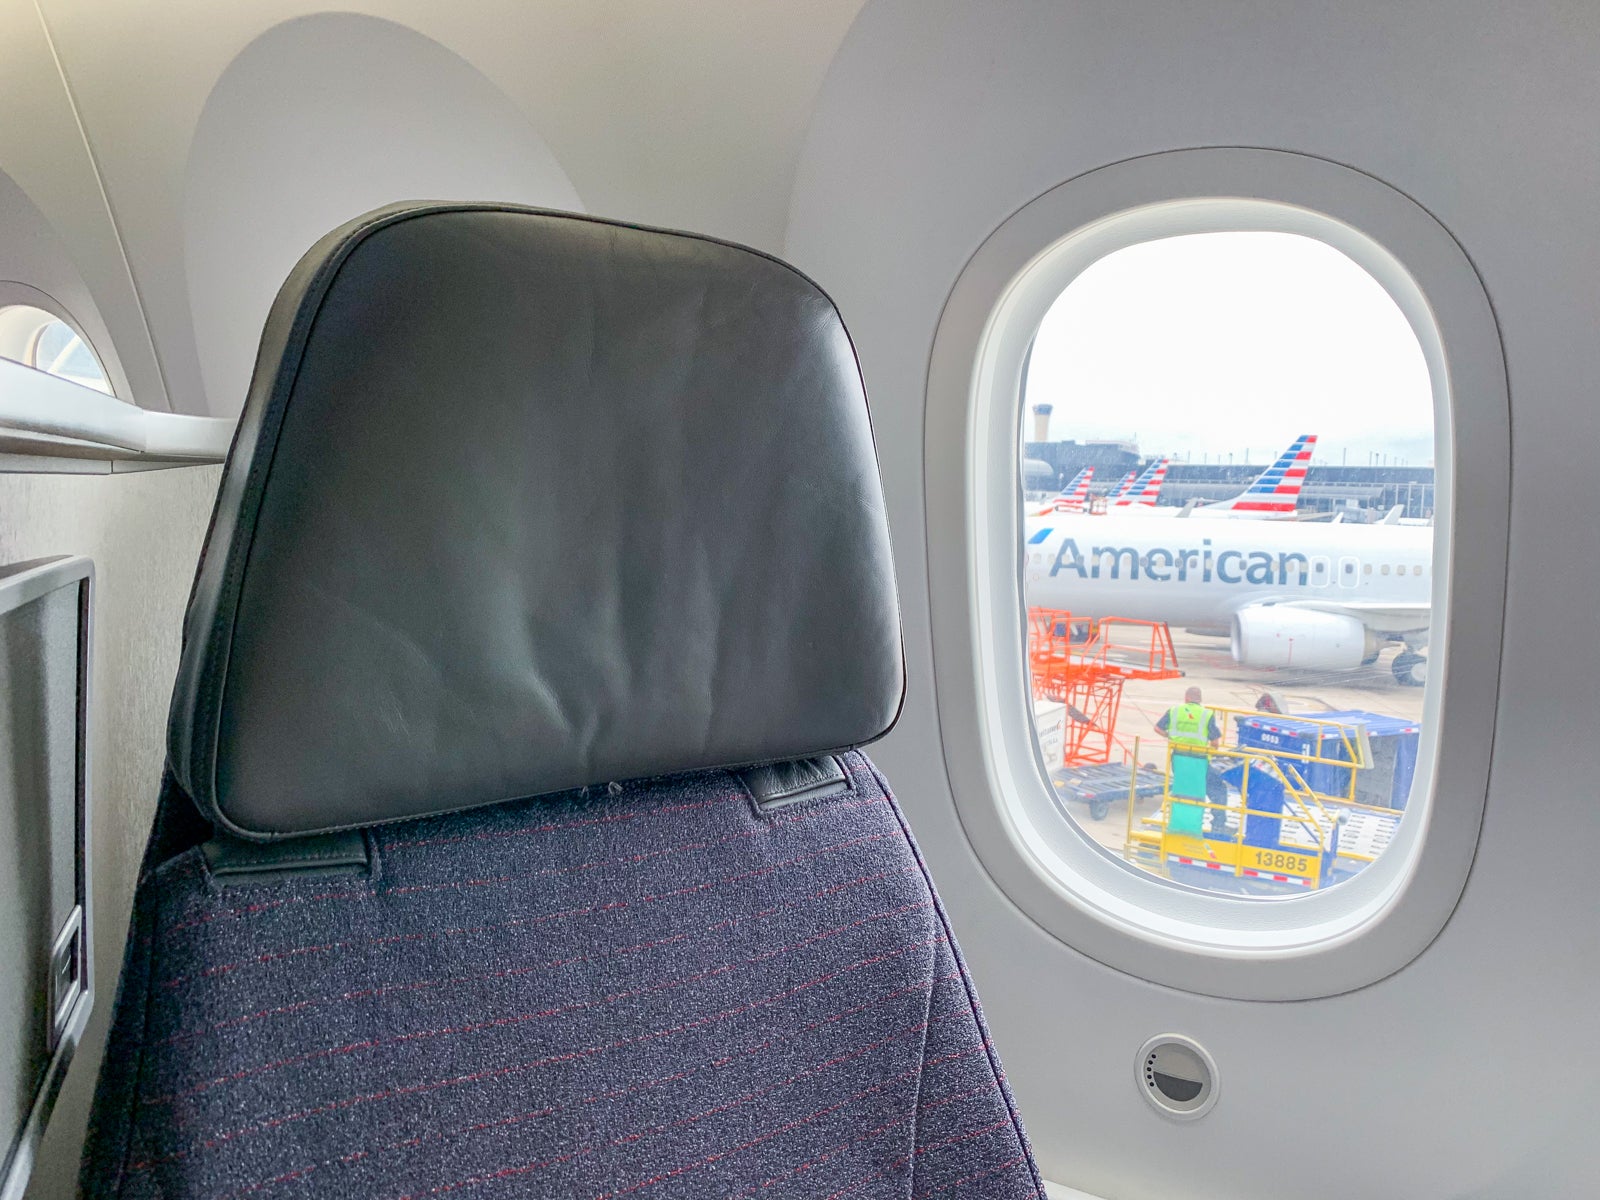 Why Do Some Airplanes Have Rear-Facing Seats?